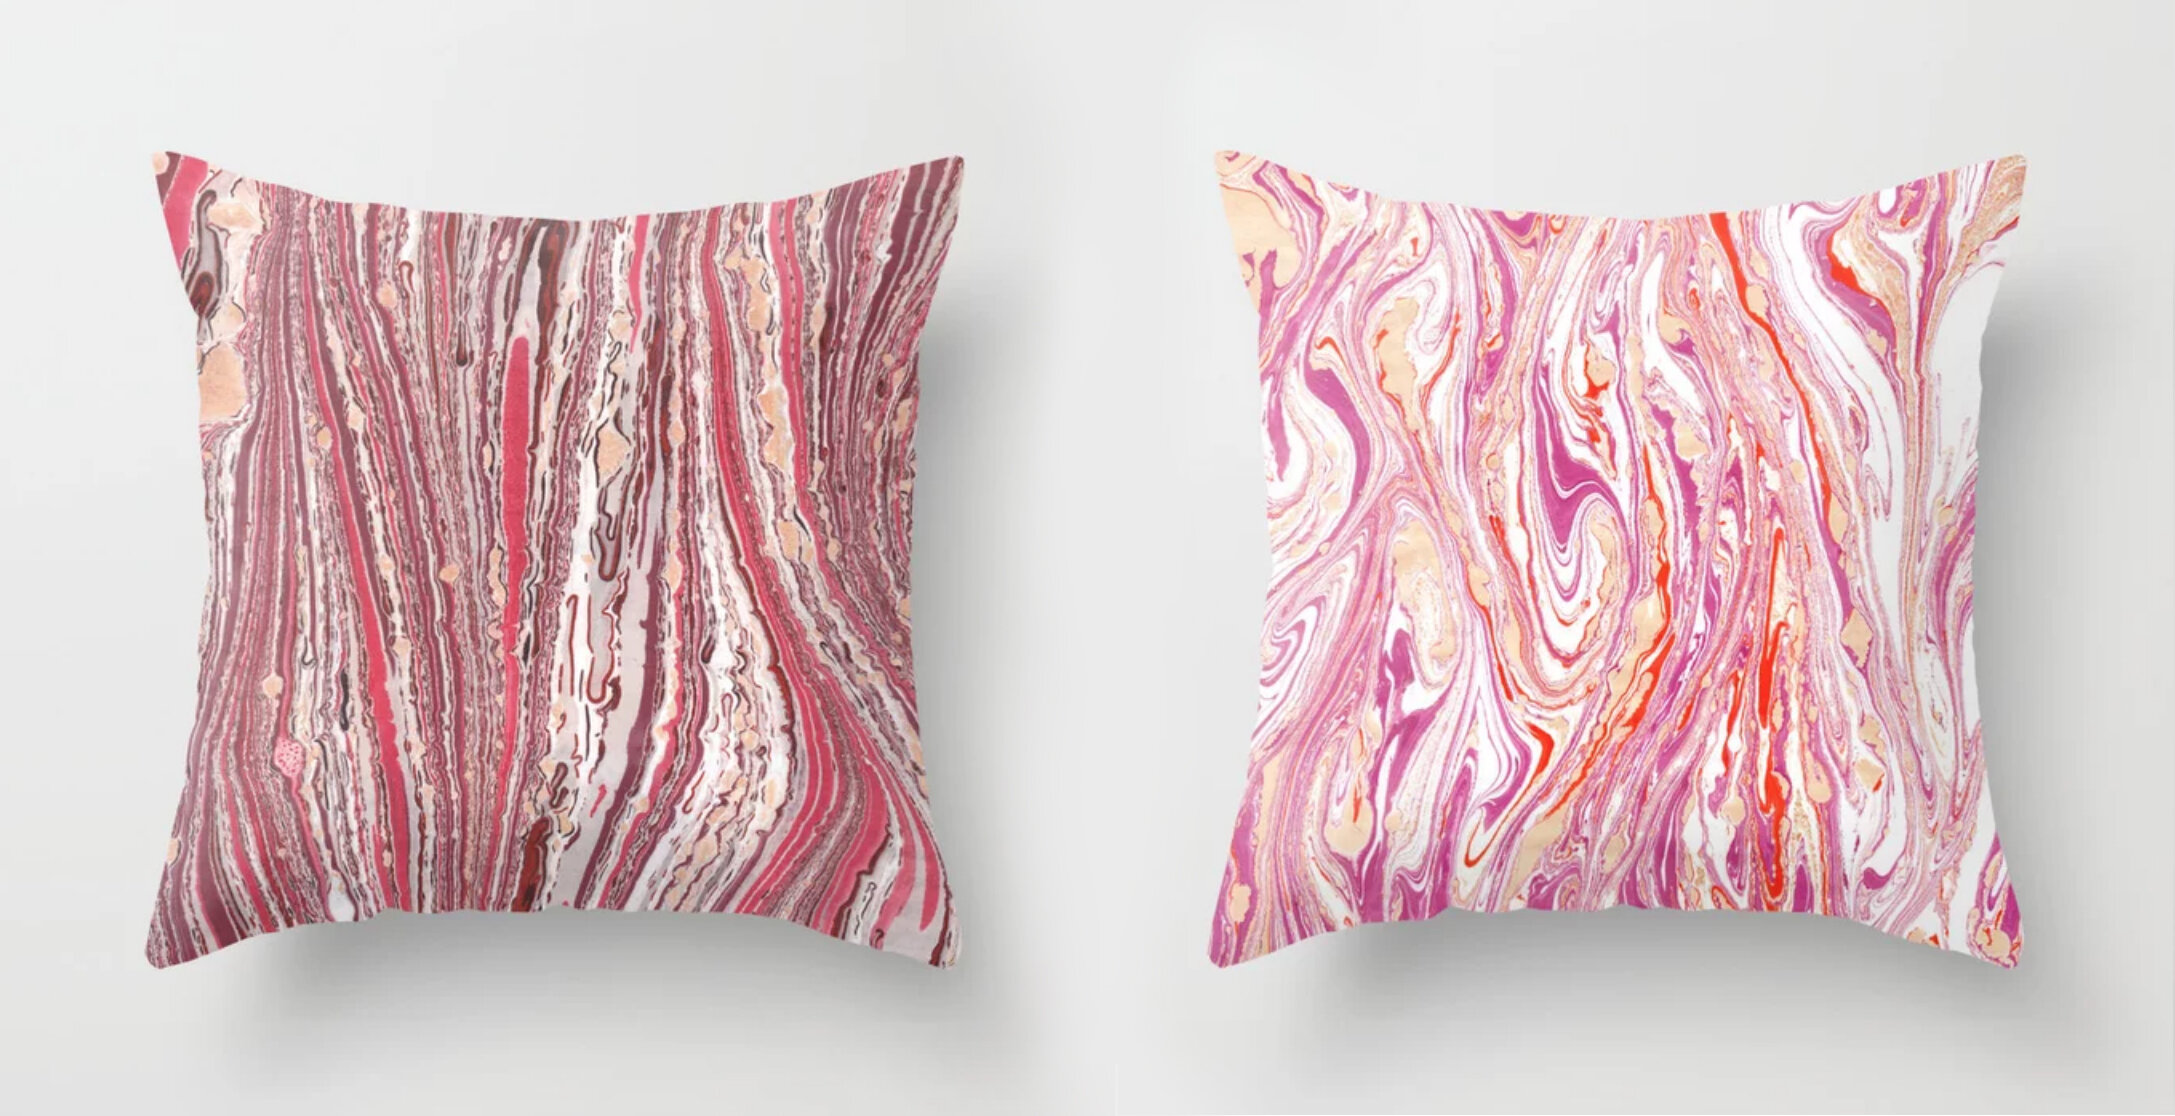  Available on Society6 